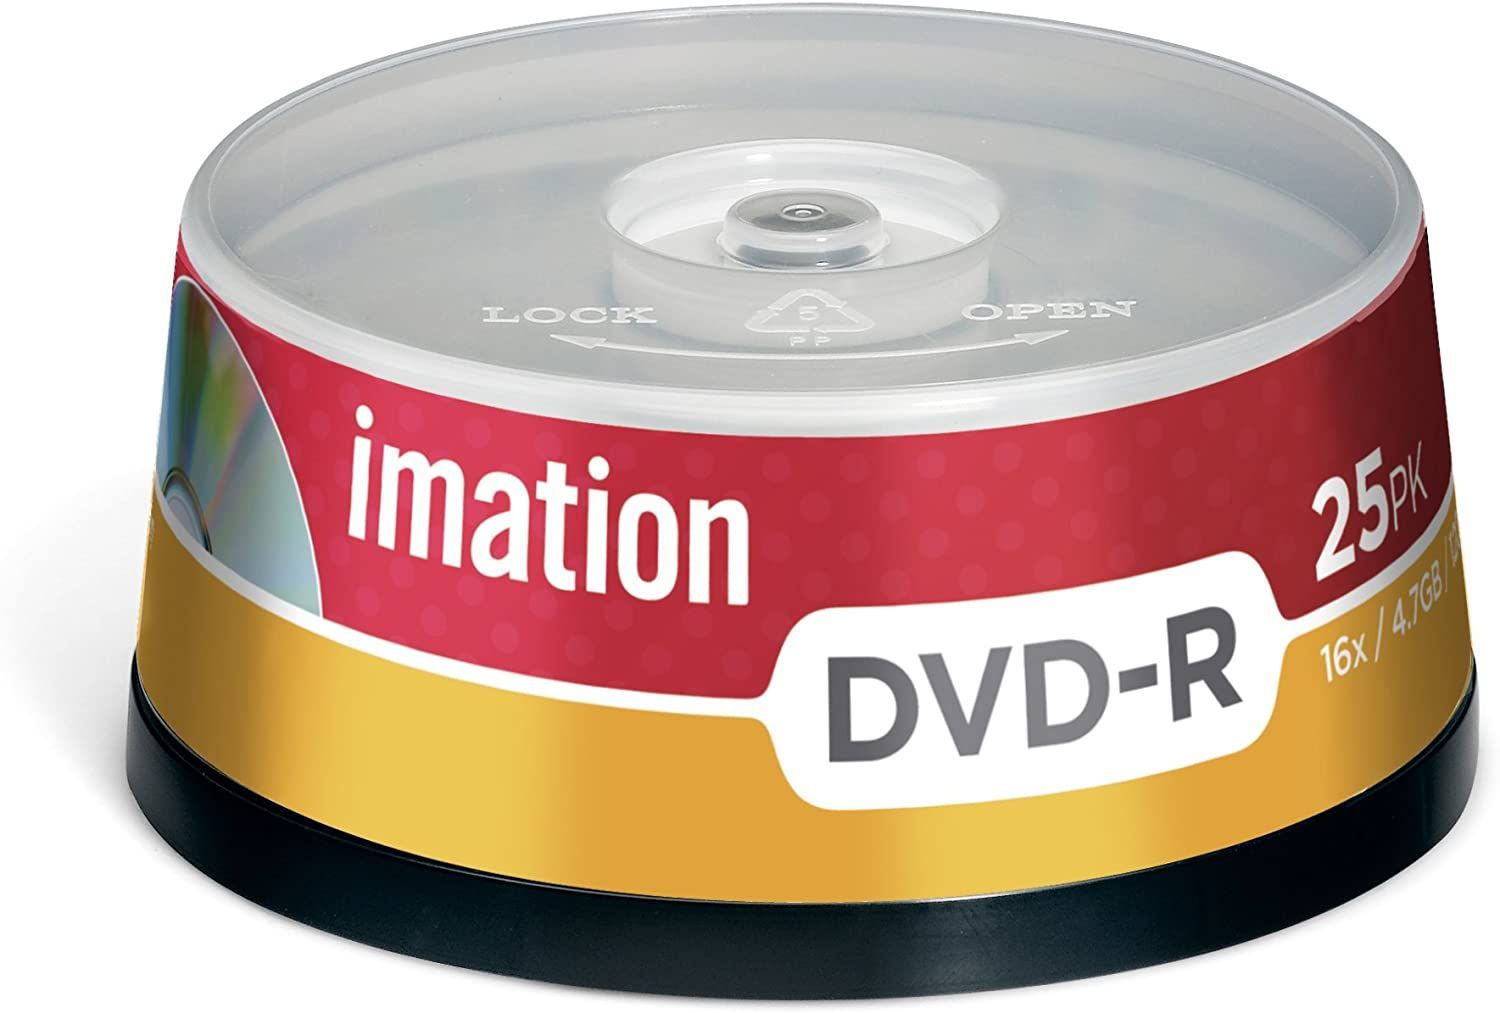 DVD-R Imation 4.7GB 16X (21979) Spindle 25